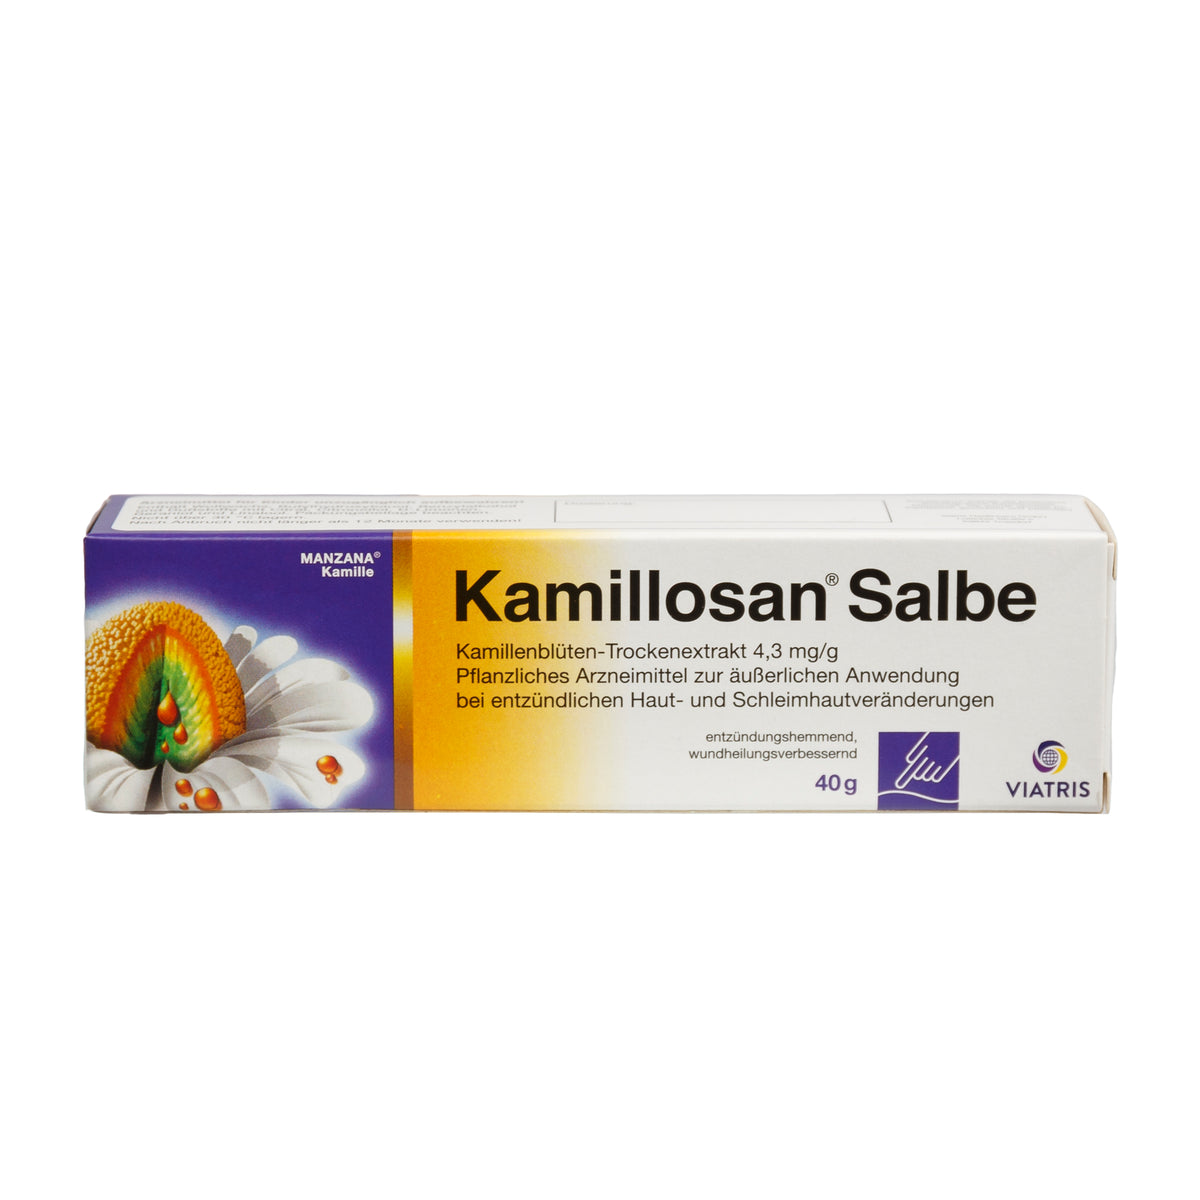 Primary Image of Kamillosan Cream Ointment